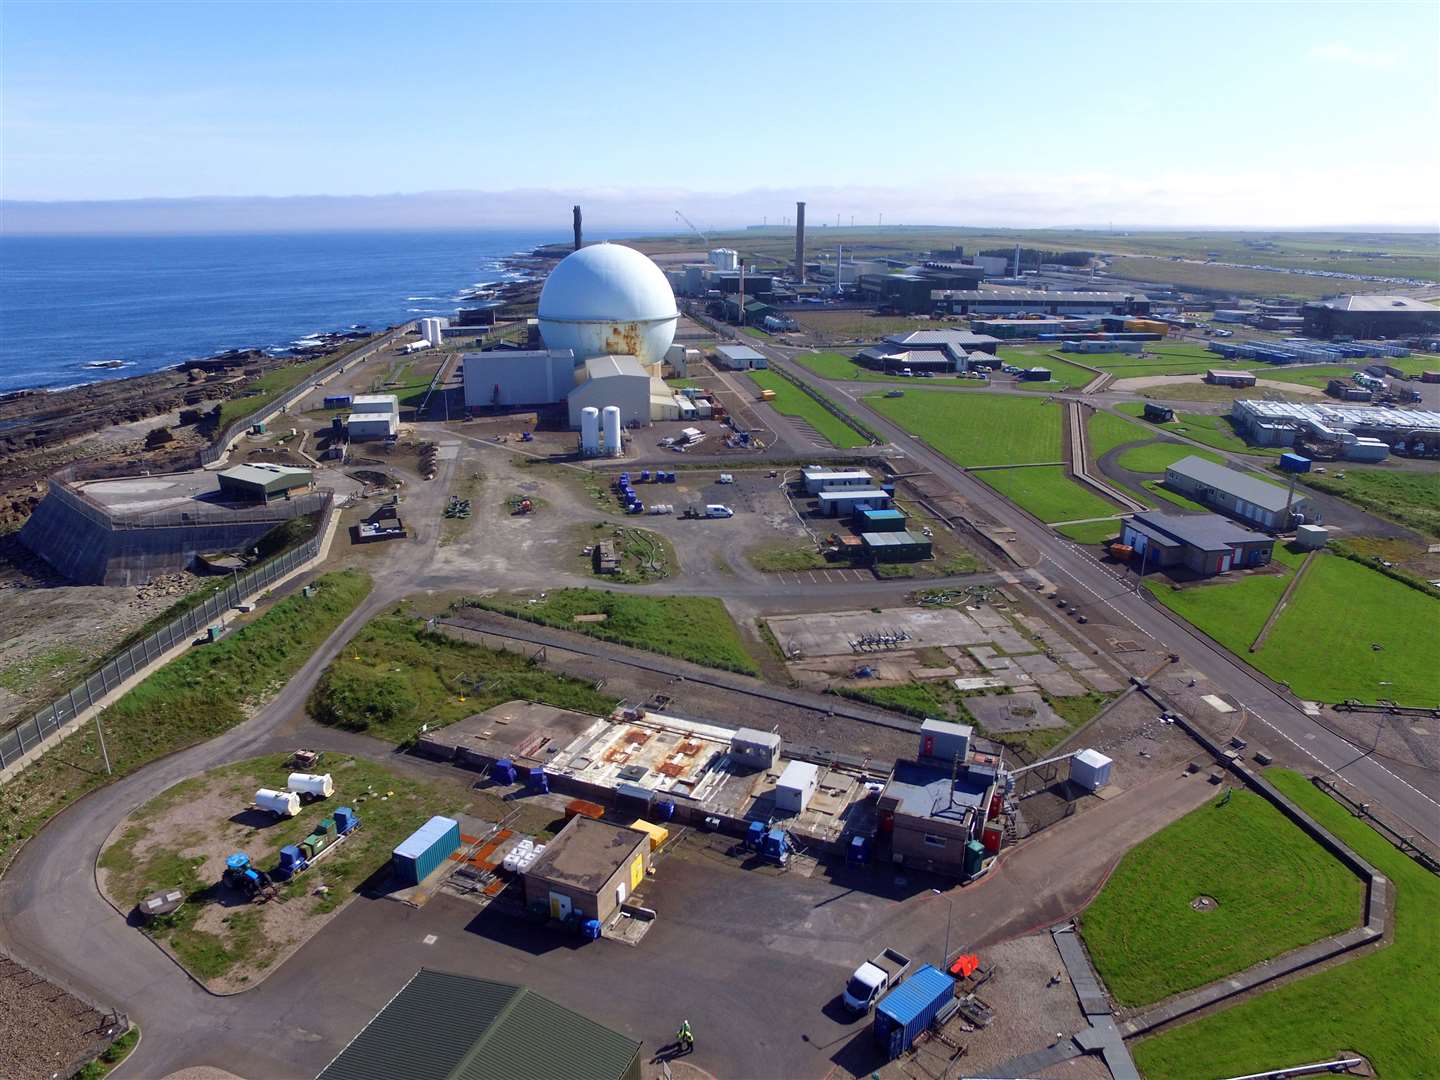 Morale at Dounreay is "at an all-time low," according to staff